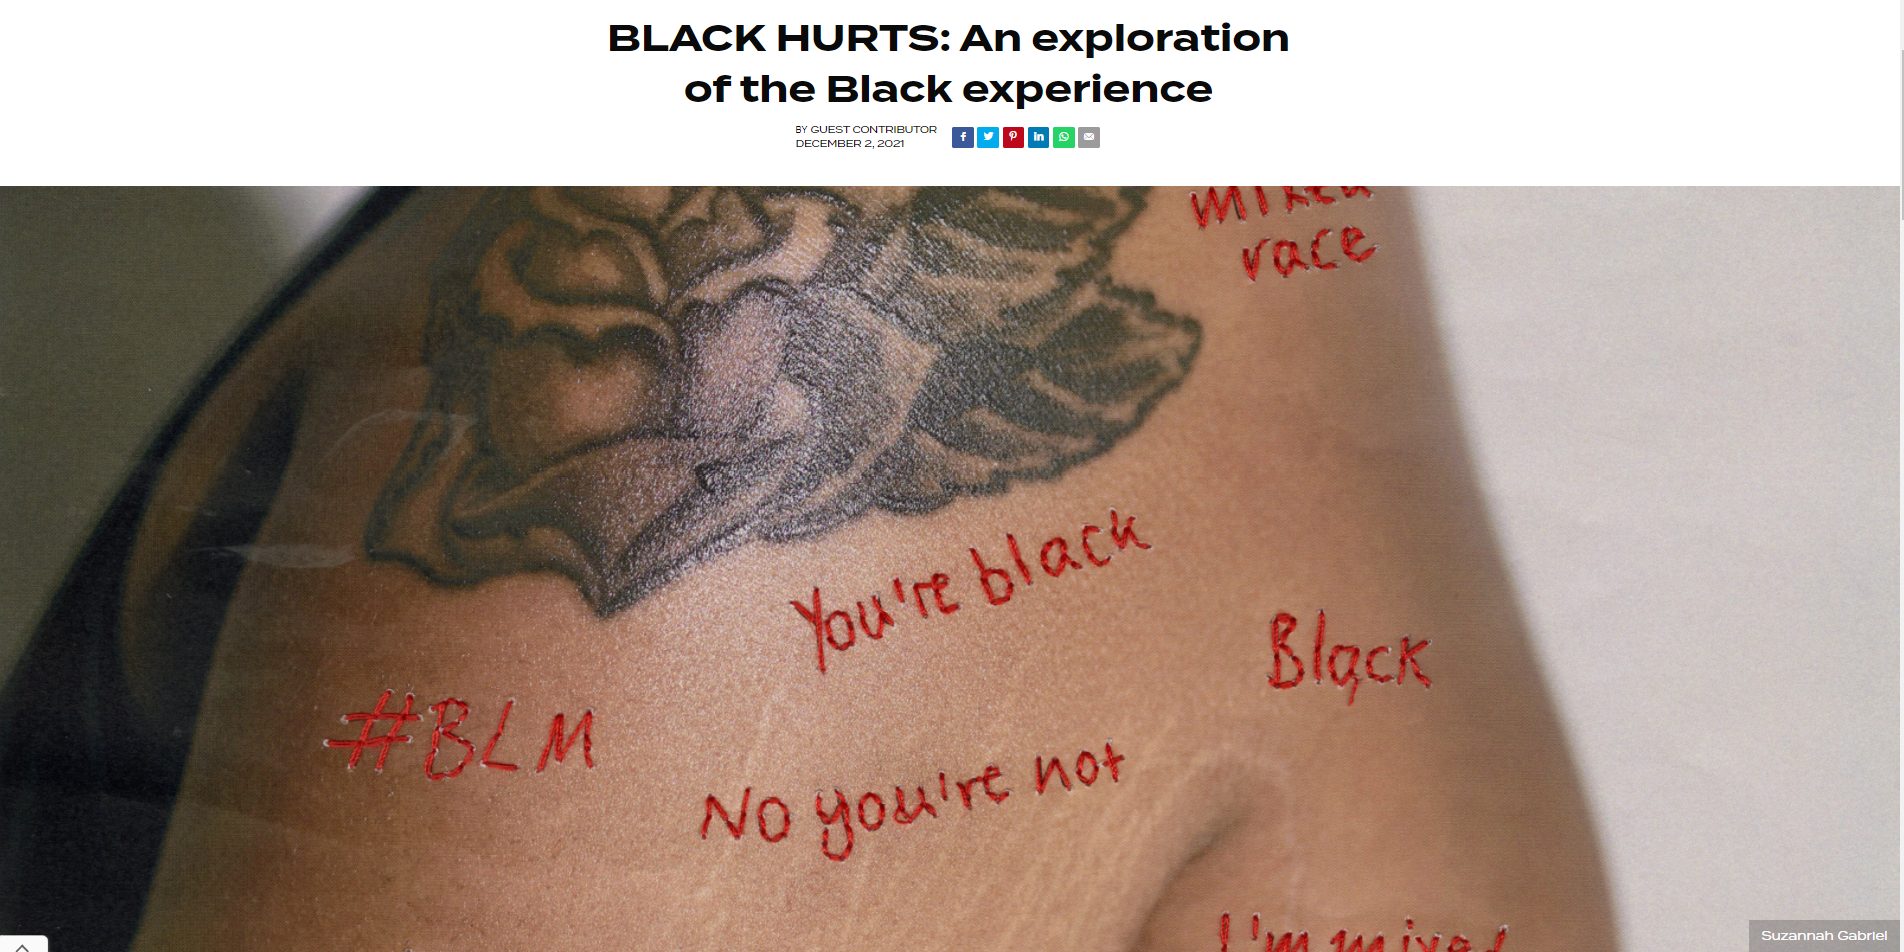 BLACK HURTS: An exploration of the Black experience